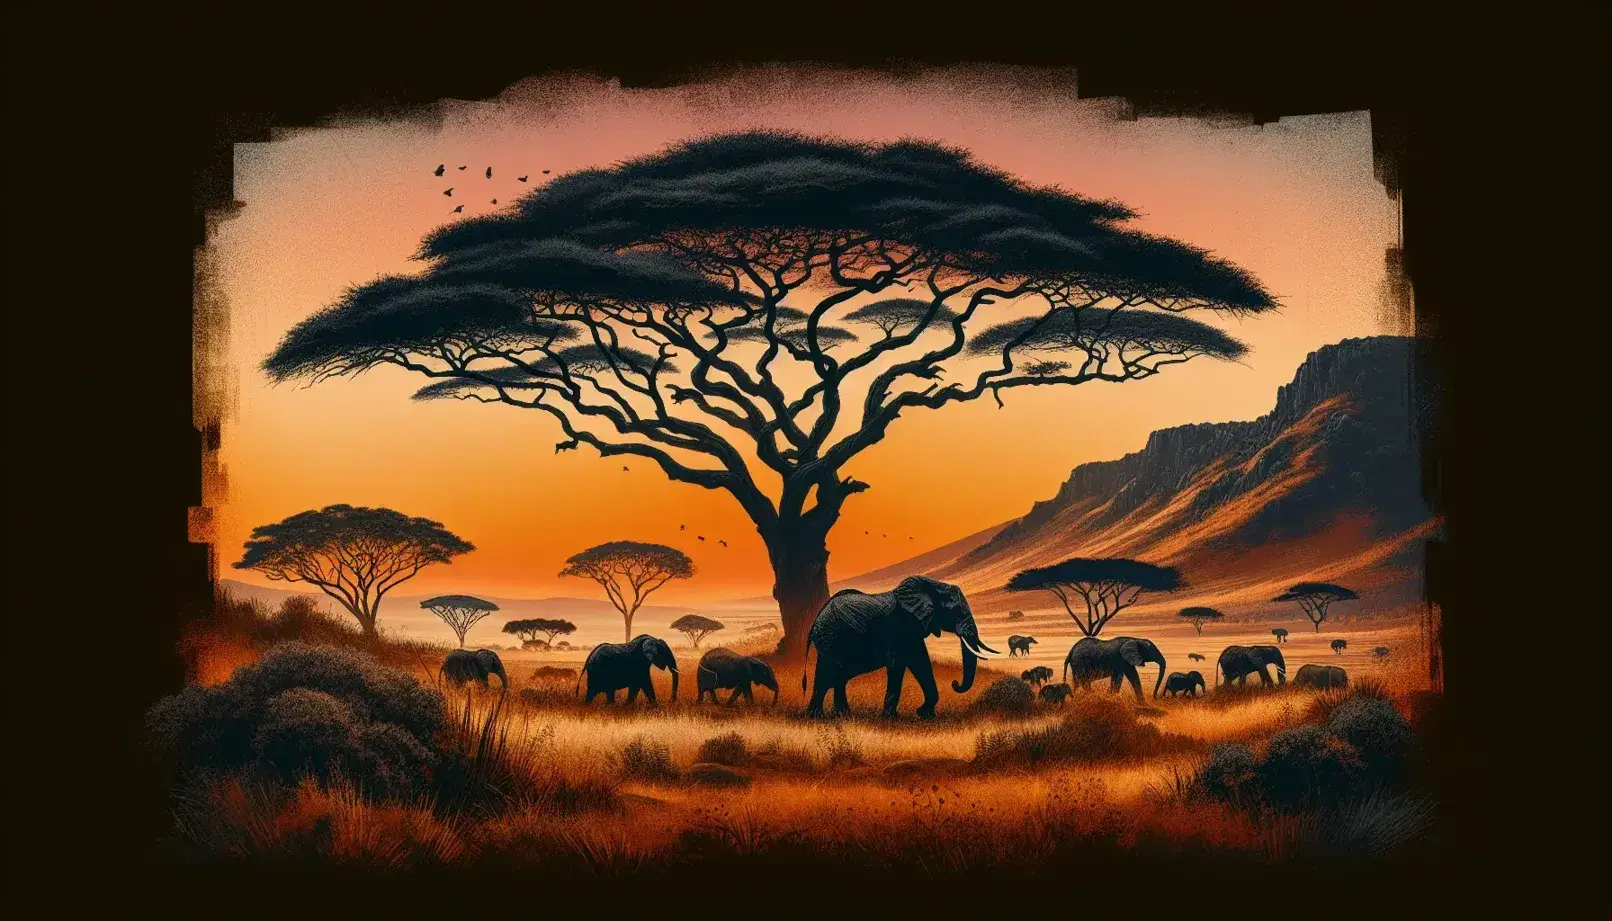 Sunset in the African savannah with acacia tree in silhouette and herd of elephants among golden grass and hills blurred on the horizon.